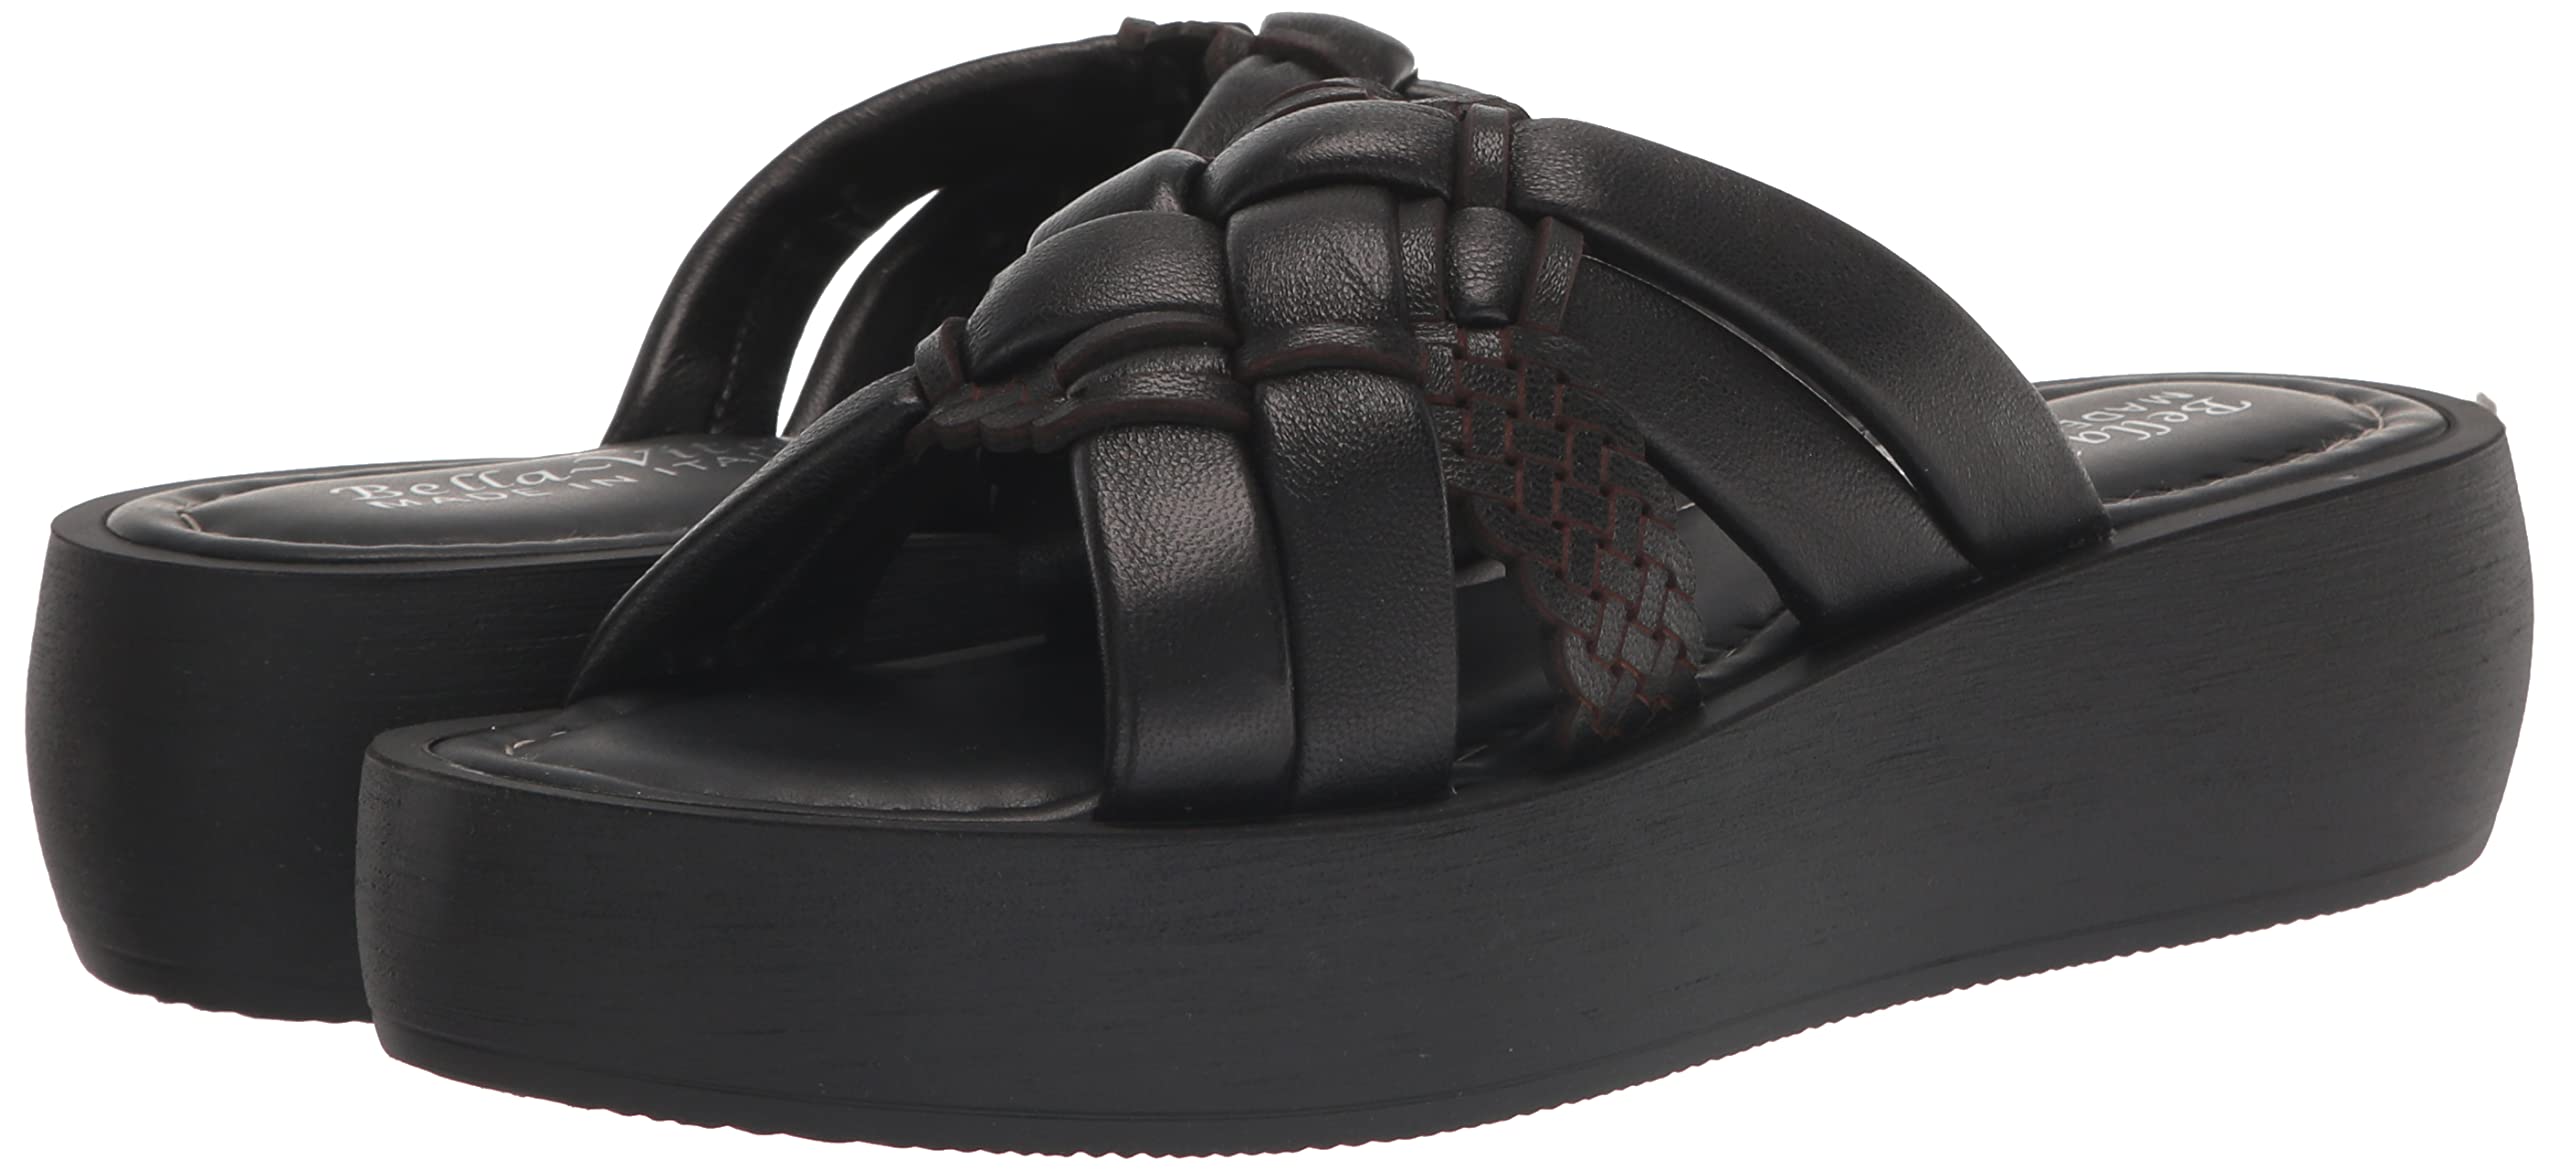 Bella Vita Made in Italy Women's Ned-Italy Slide Sandal, Black Leather, 8 X-Wide